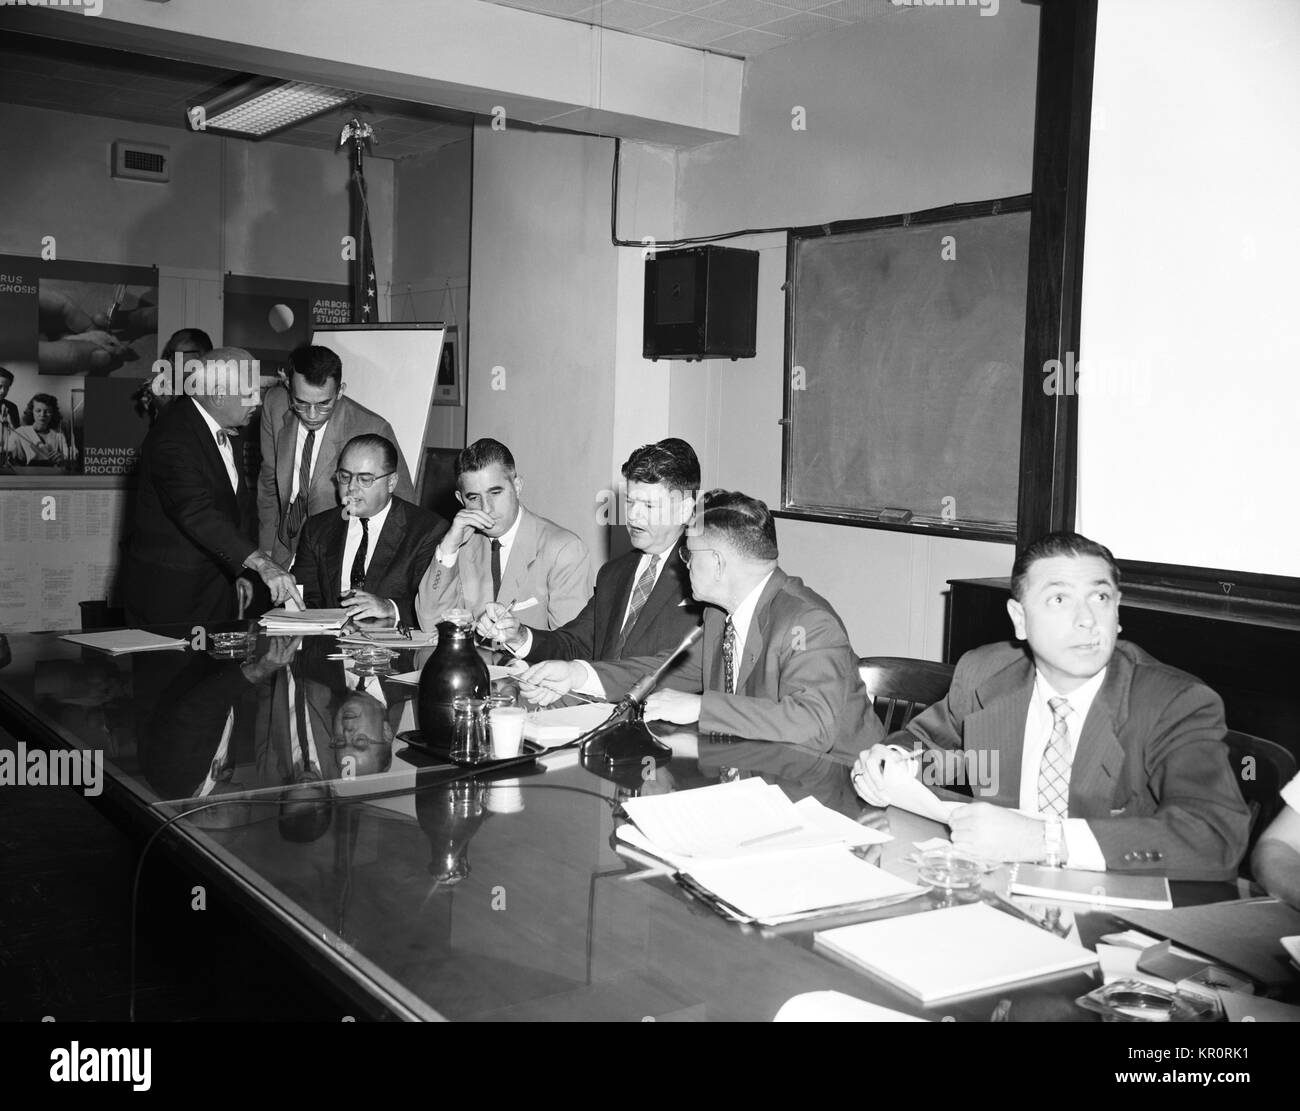 This 1956 photograph depicts a number of CDC officials during a bid opening meeting for the construction of new CDC facilities, 1956. Various governmental contracts are governed by established protocols, which often include a bidding process amongst interested parties. Image courtesy CDC. Stock Photo